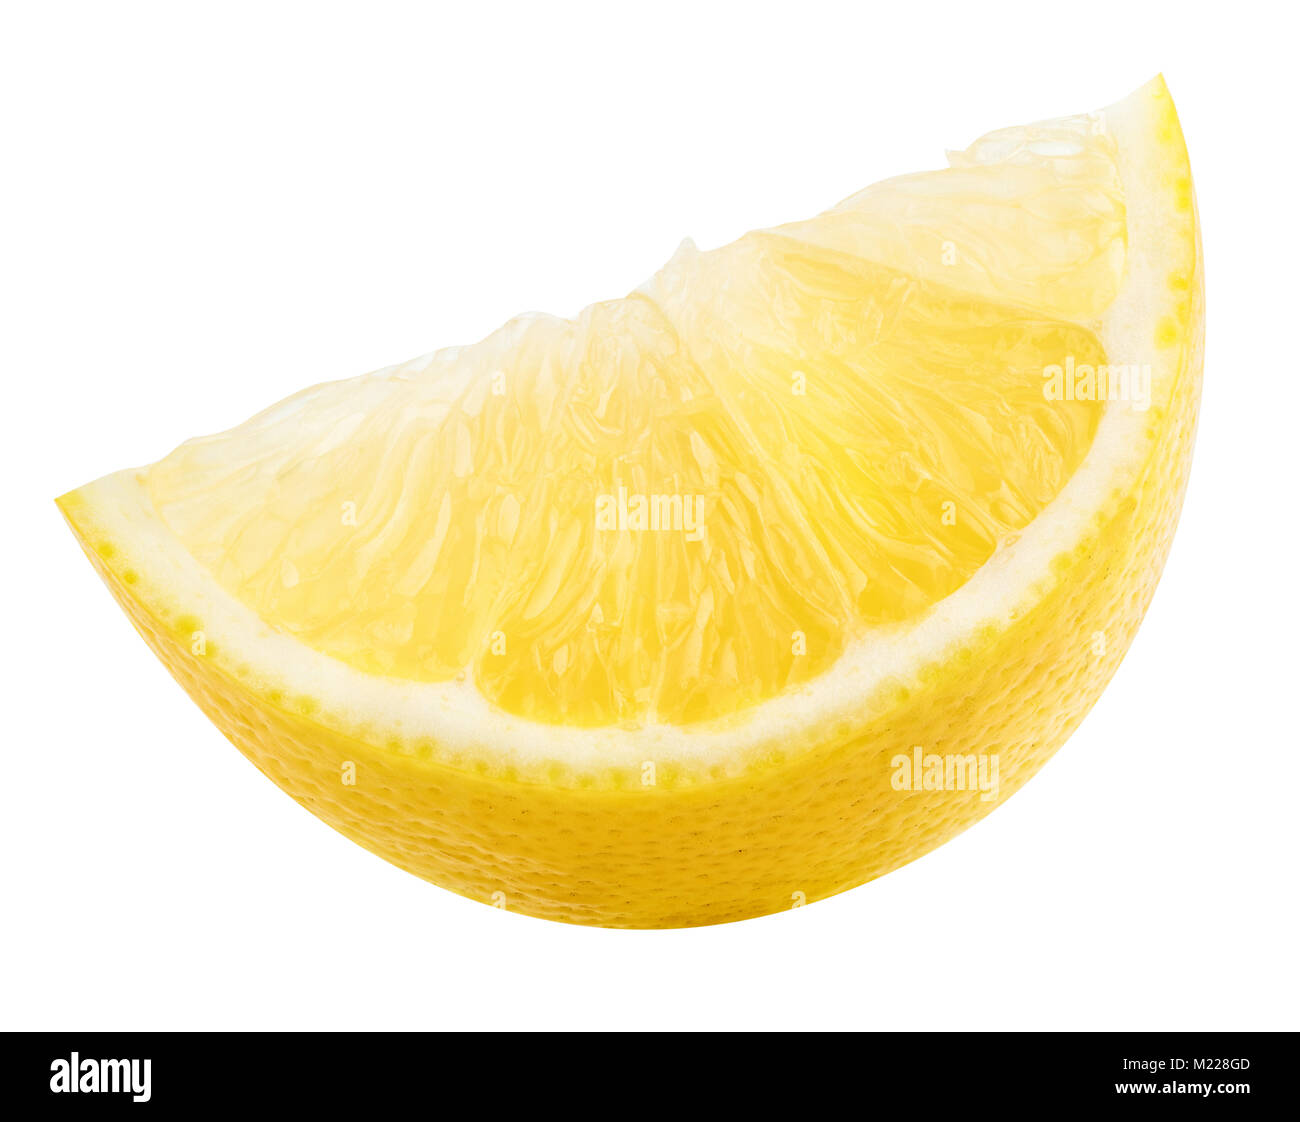 Citron isolated on white with clipping path Banque D'Images